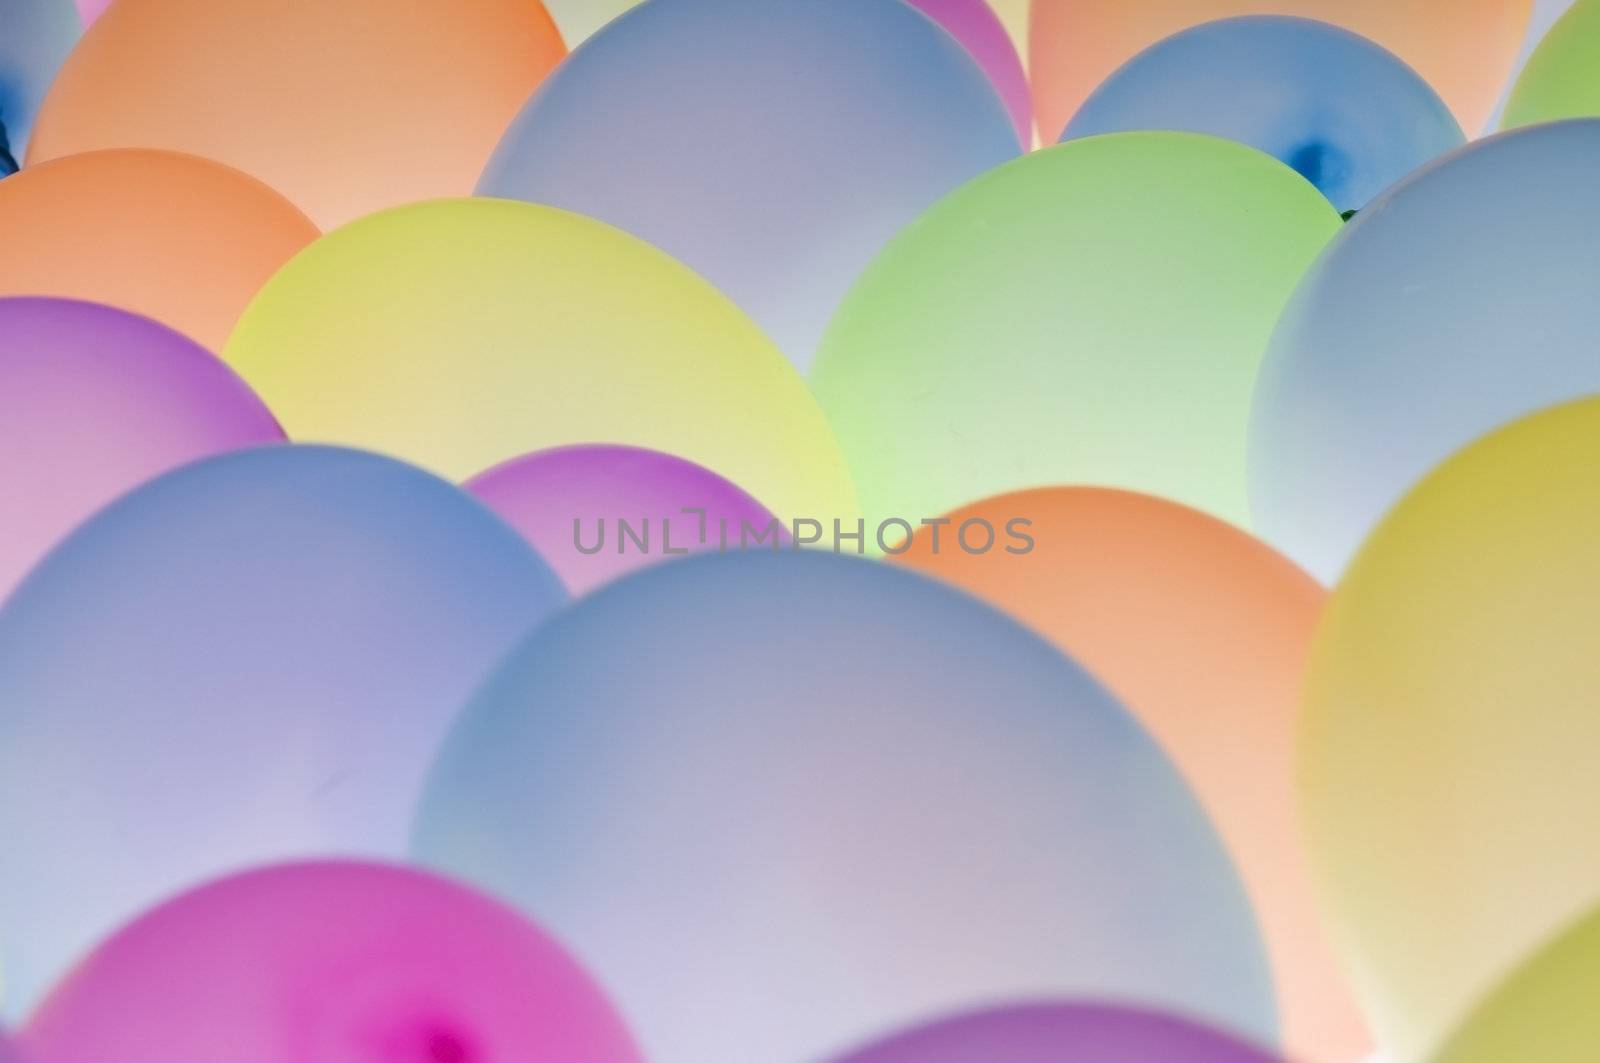 abstract texture background of backlite colorful ballons in different sizes